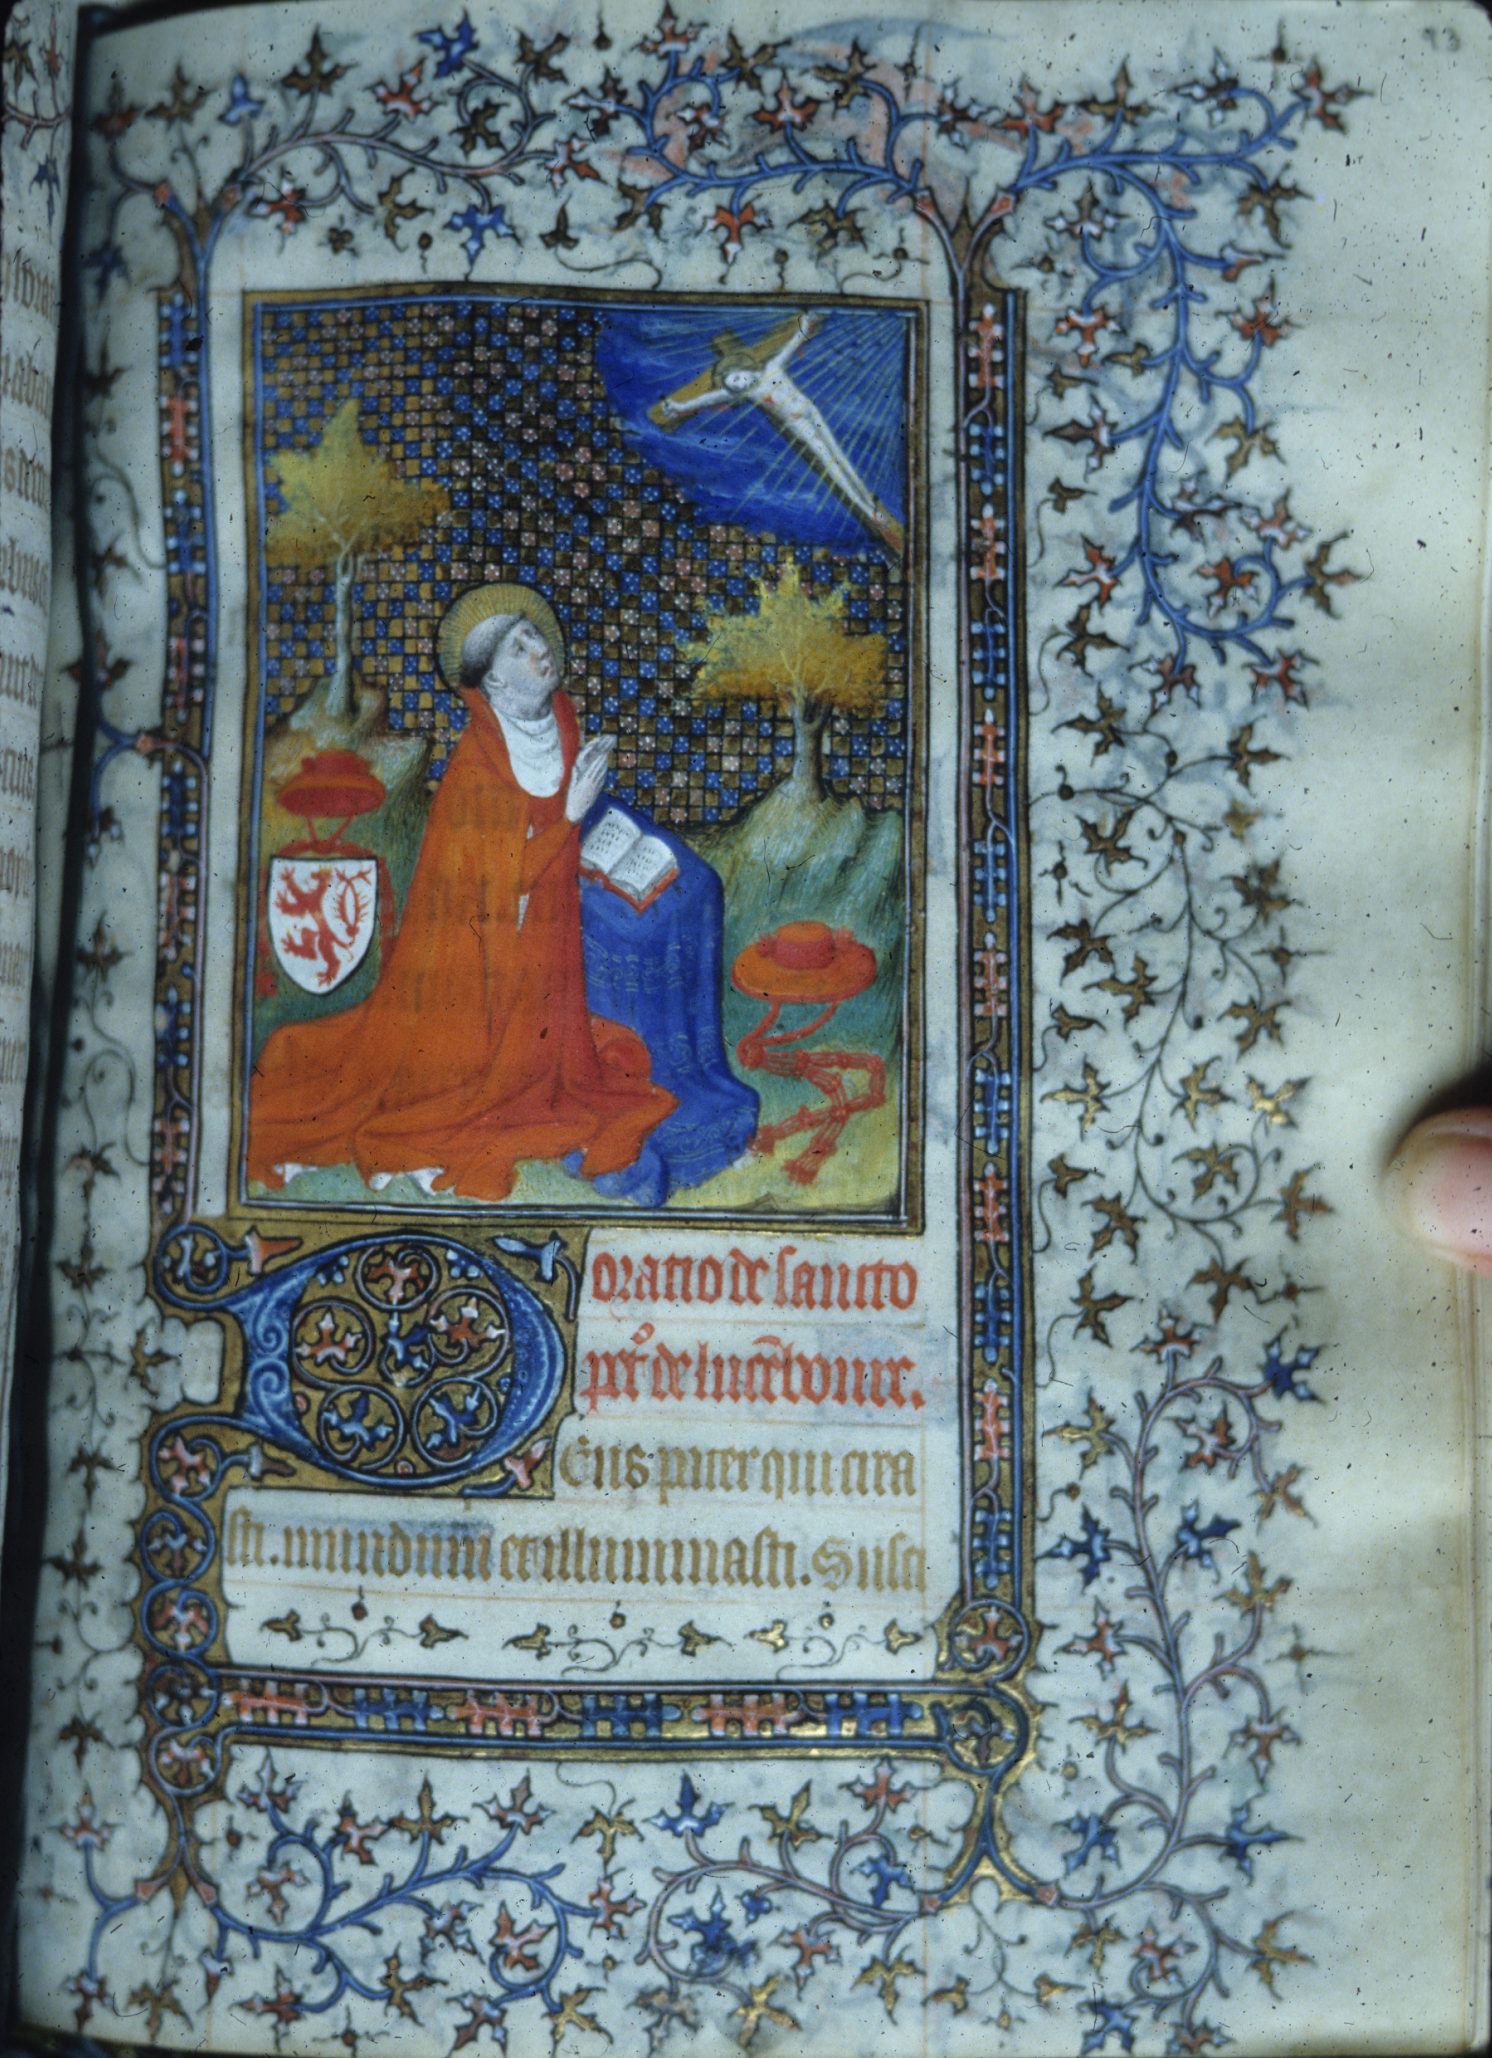 https://www.oneonta.edu/faculty/farberas/arth/Images/ARTH_214images/Manuscripts/15_century/WAM_232/f93_peter_luxembourg.jpg